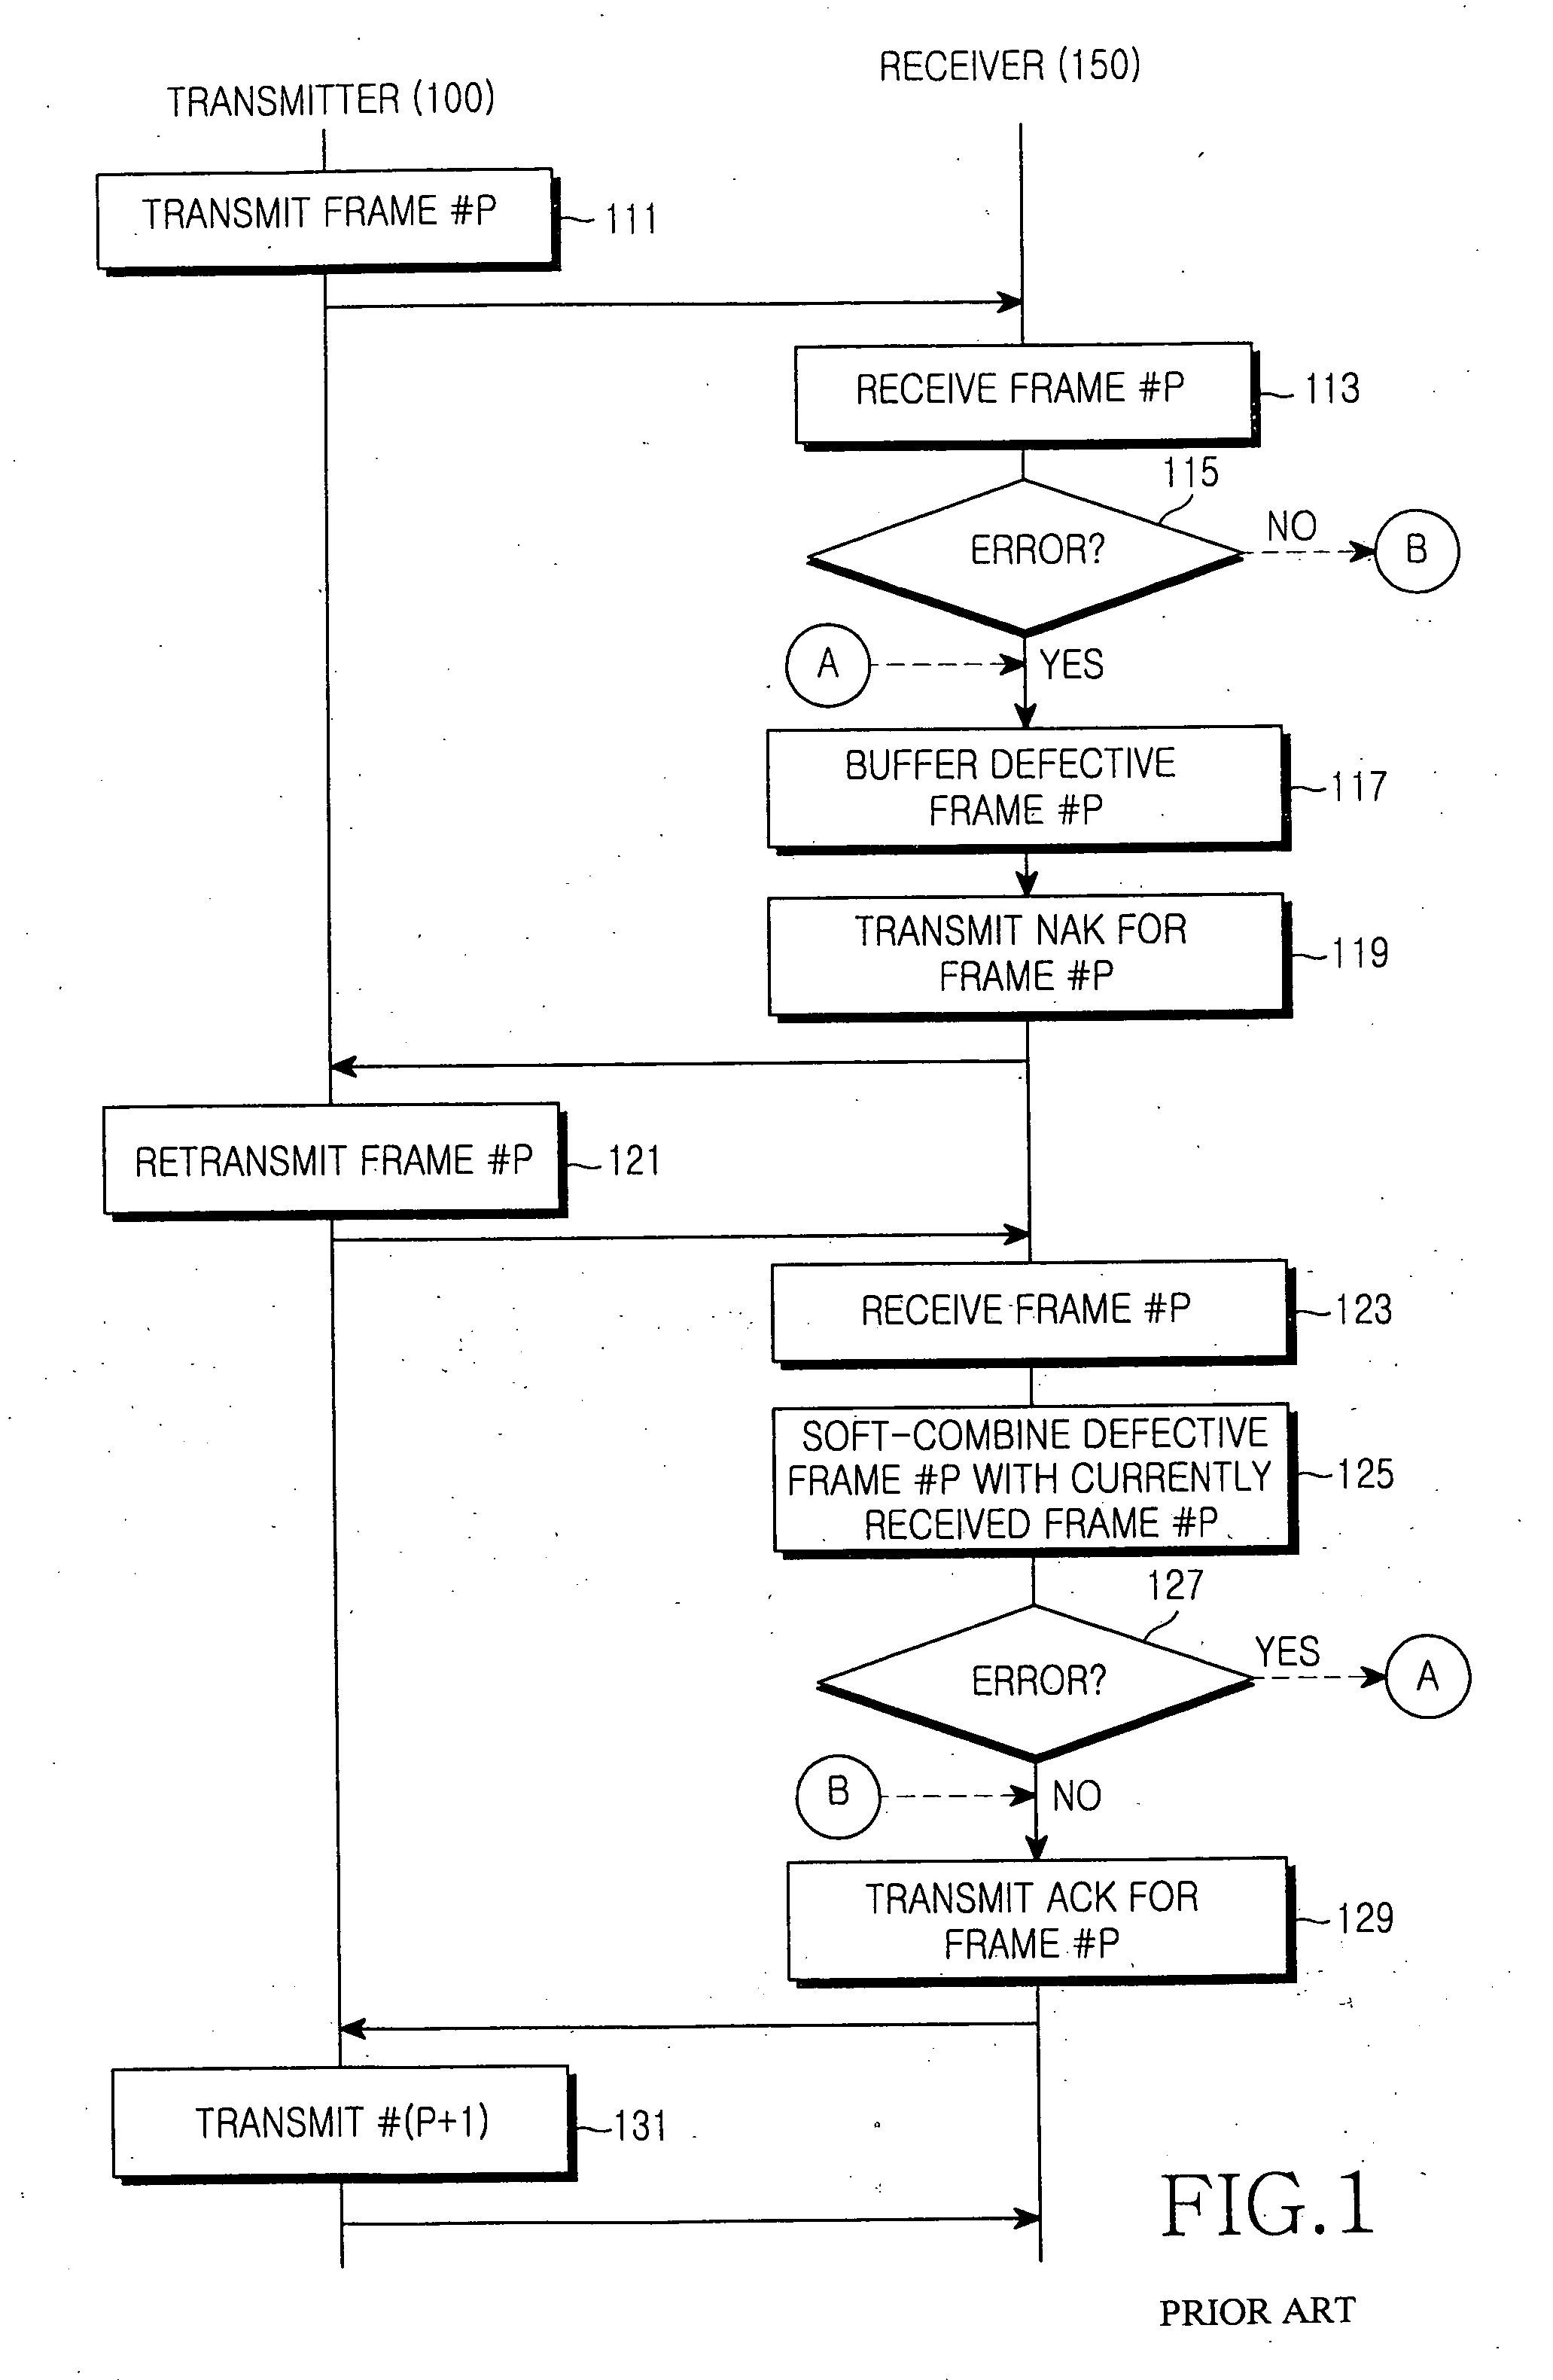 Apparatus and method for retransmitting data in a communication system